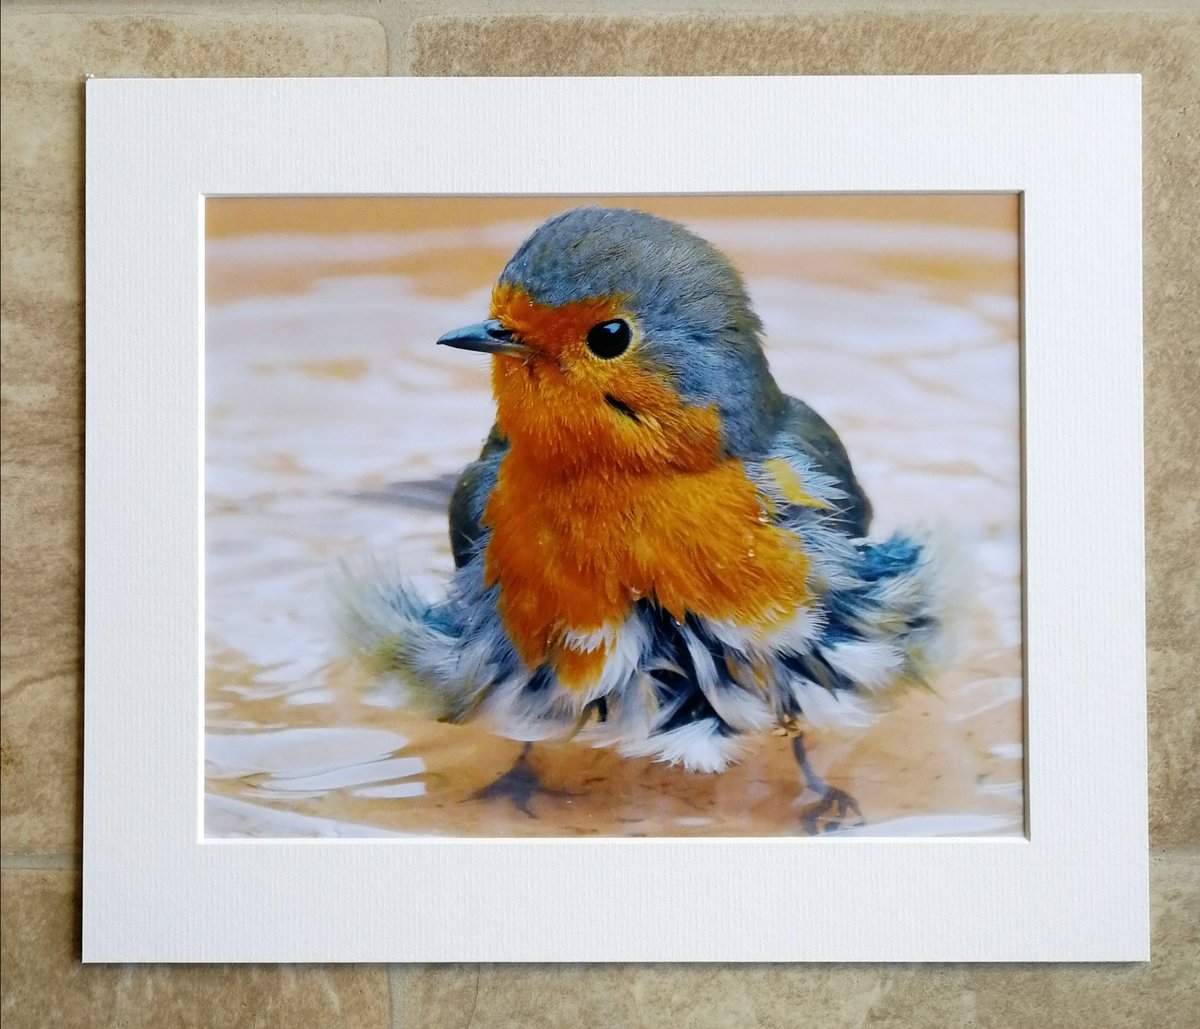 'Bathing Robin' 10x8 mounted print. I've sold more products, in various forms, of this photo than any of my other pictures! Now it's available as 10x8 print too!  You can buy it here; https://www.carlbovis.com/product-page/bathing-robin-10x8-mounted-print 